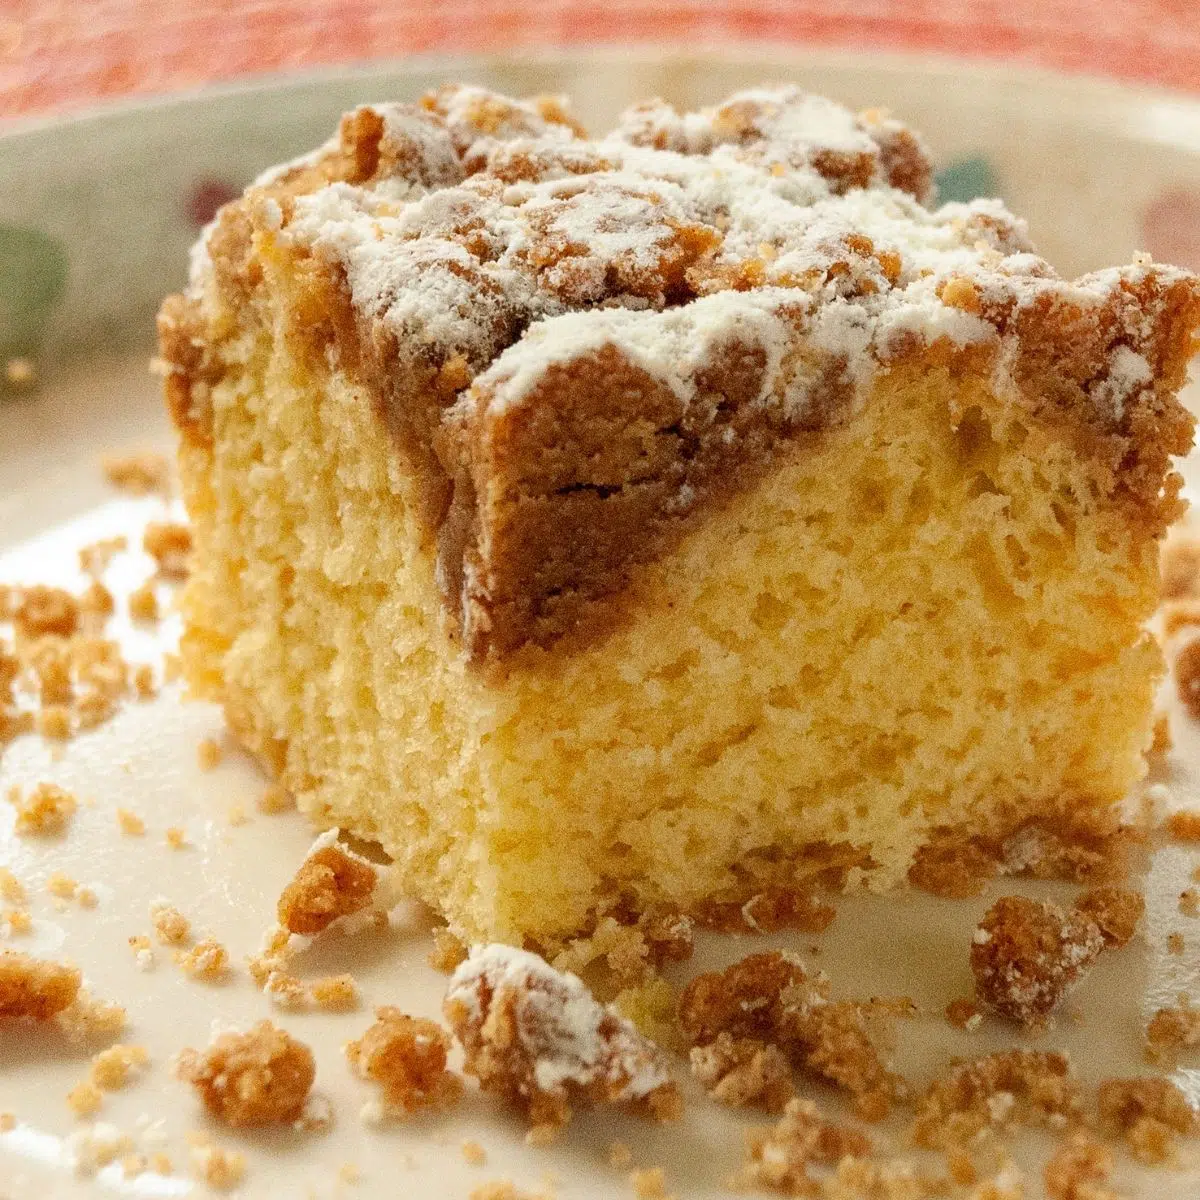 A generous slice of Bisquick coffee cake on plate with crumbs.